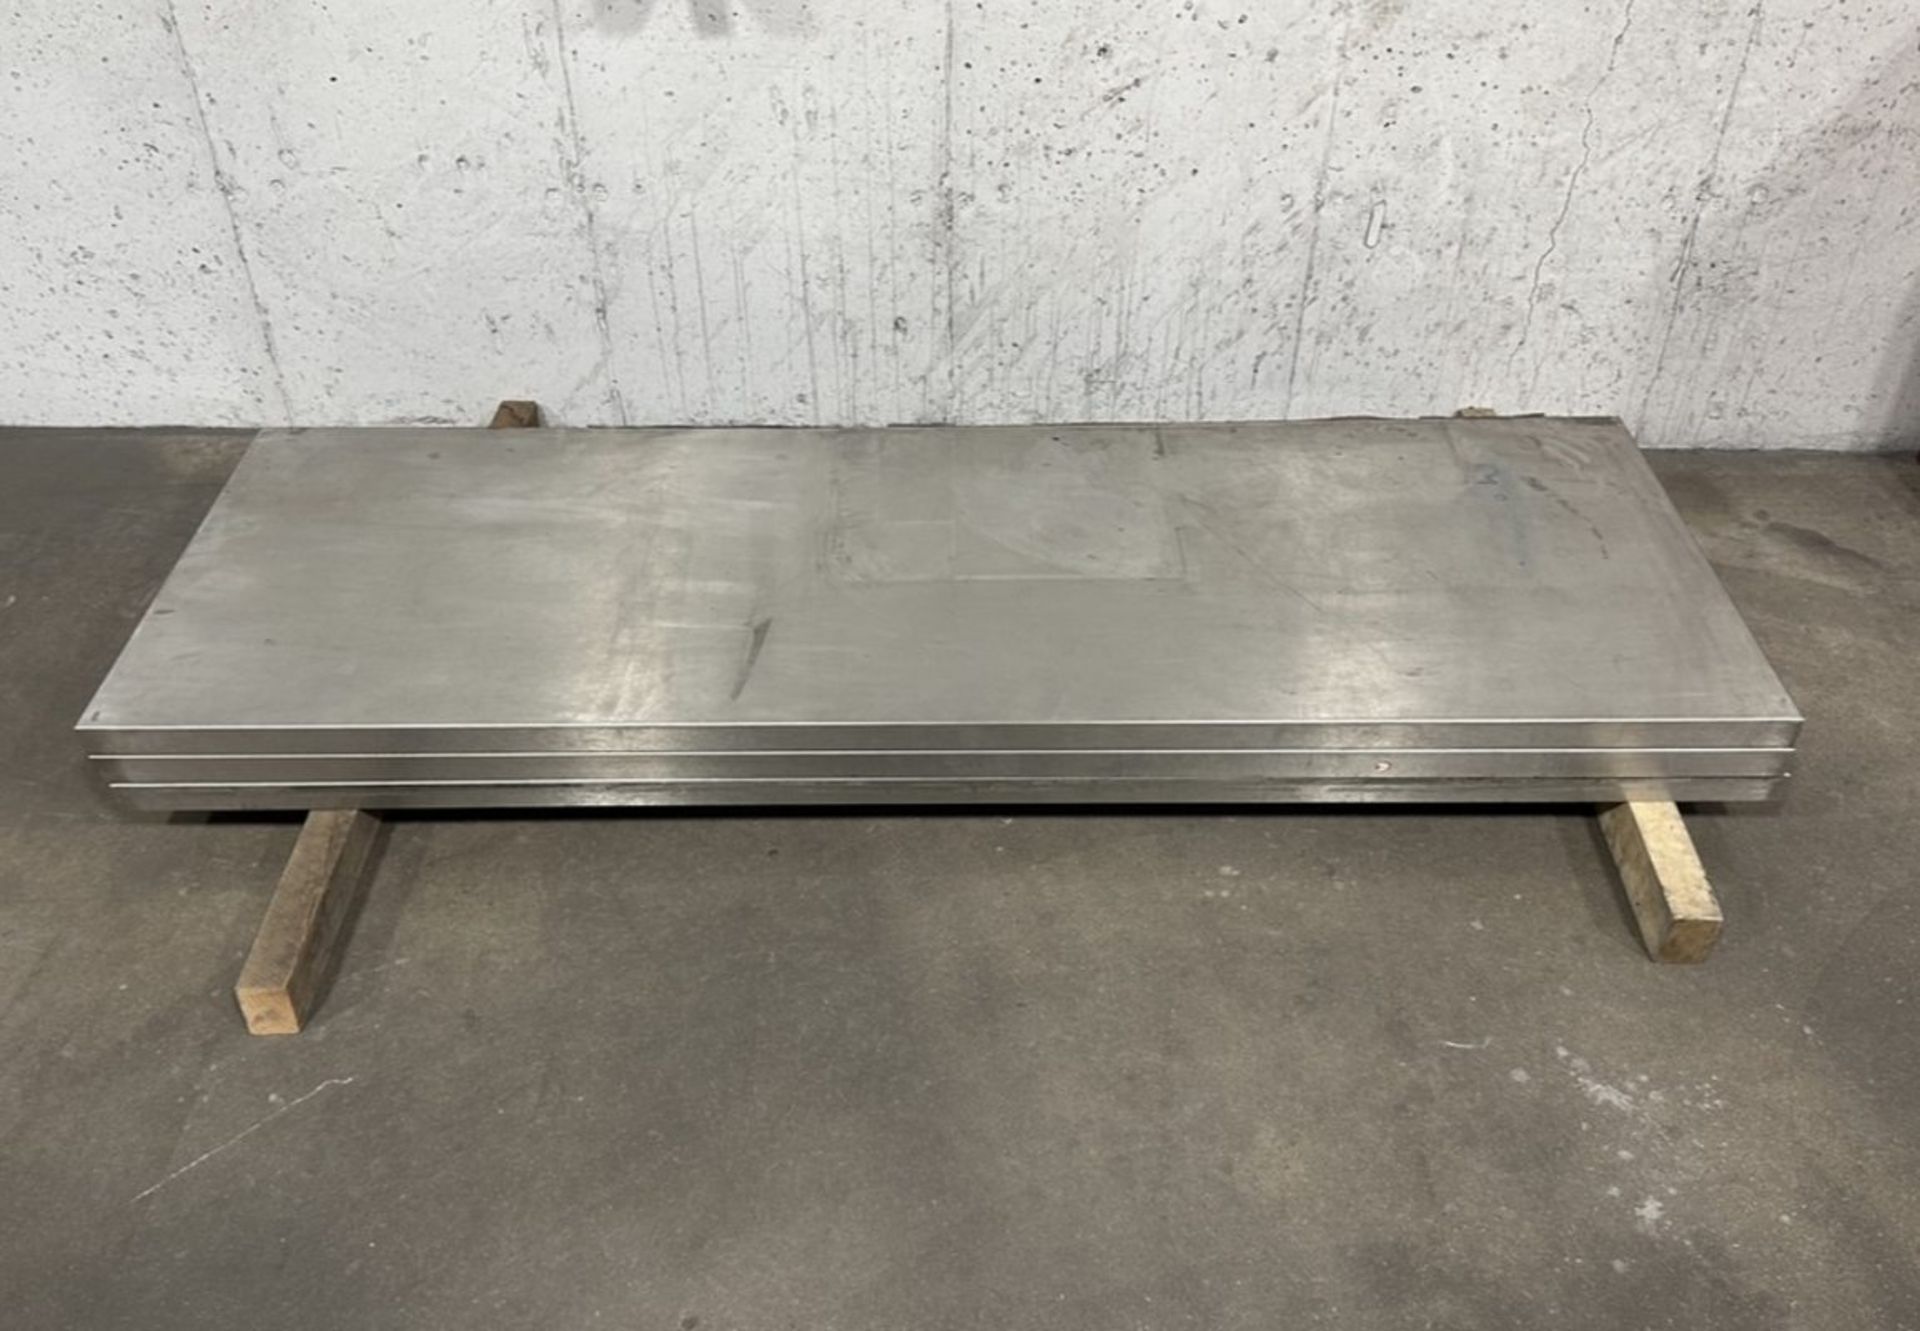 (3) Tool Cabinet Stainless Steel Table, Tops 85" x 28" x 2" - Image 3 of 3